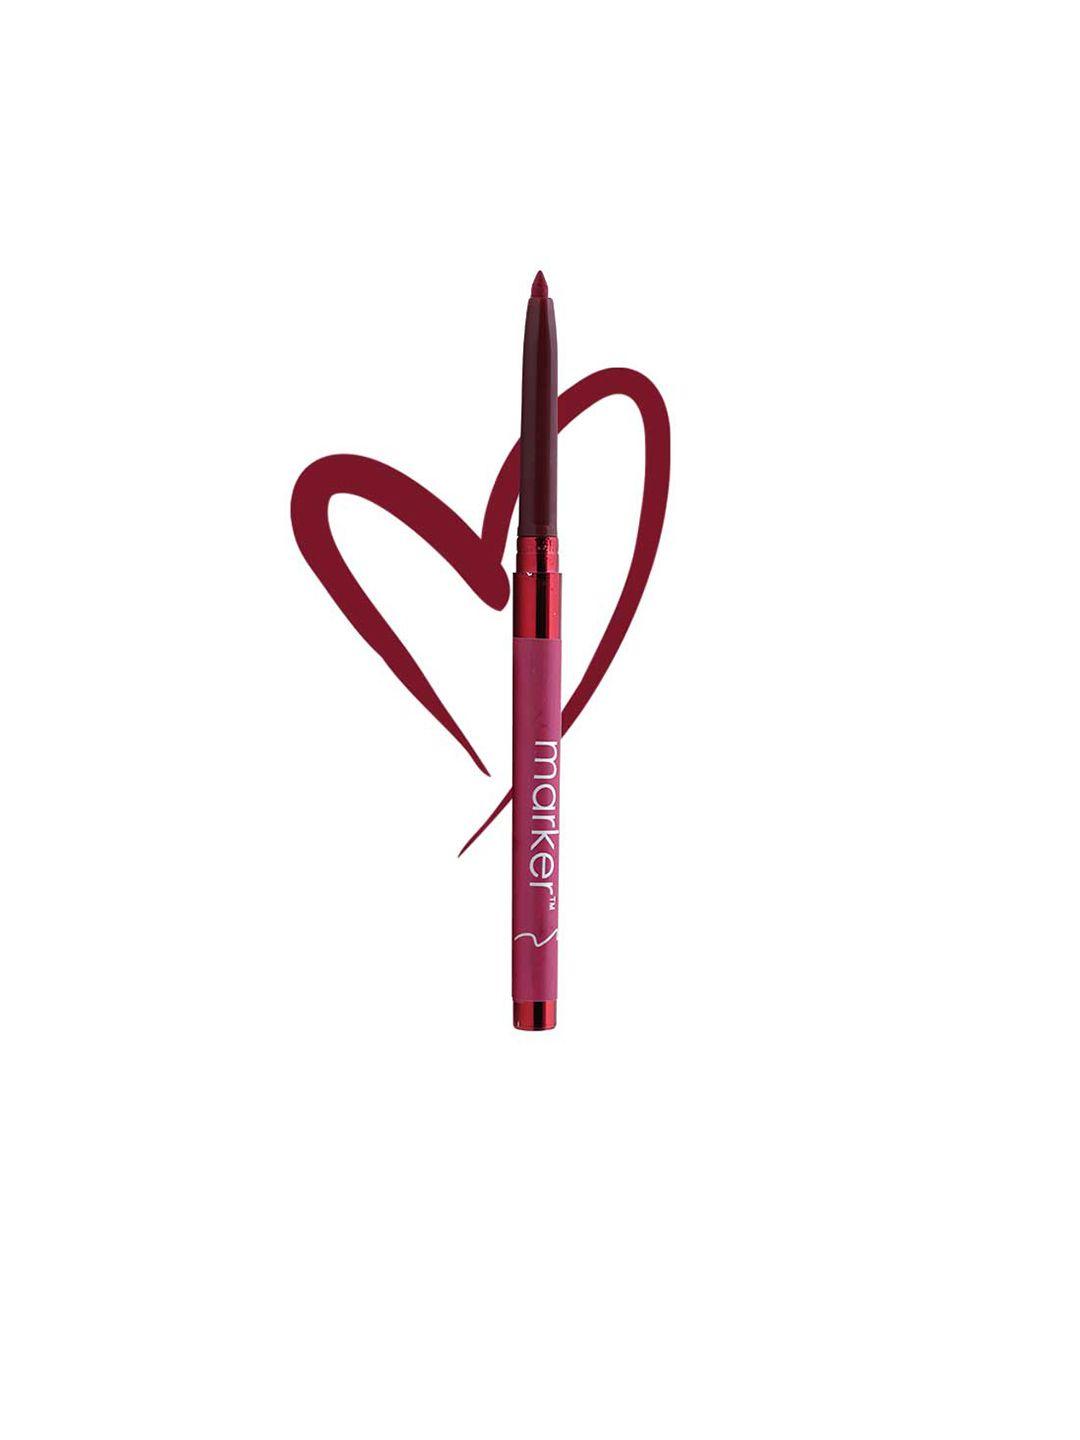 beautyrelay london outline the lips long-lasting lip liner with vitamin e 0.27g - cherry red